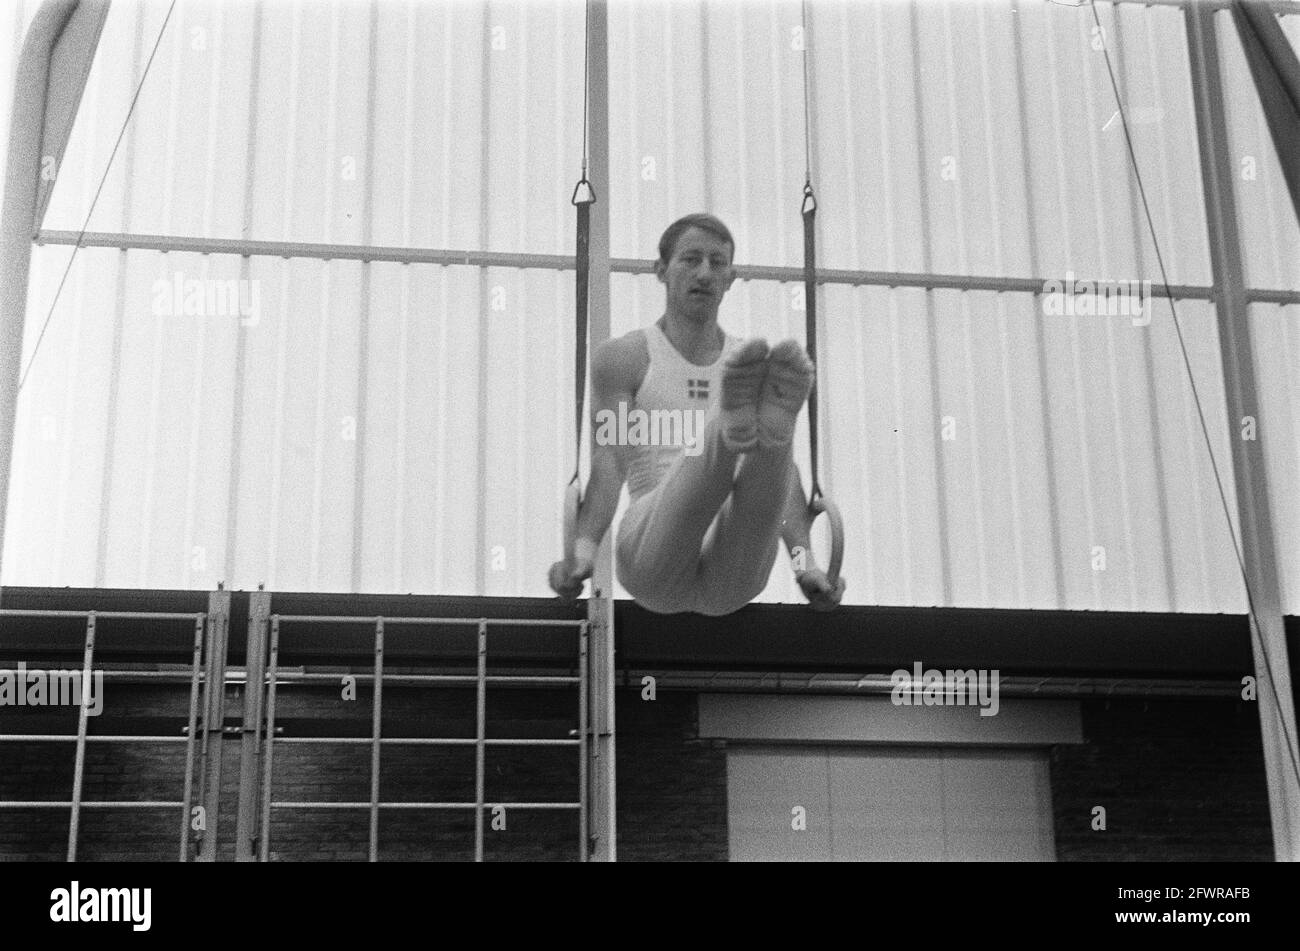 Netherlands v. Denmark gymnastics at Zaandam. Hans Peter Nielsen (champion Denmark) on rings in action, November 16, 1969, TURNEN, The Netherlands, 20th century press agency photo, news to remember, documentary, historic photography 1945-1990, visual stories, human history of the Twentieth Century, capturing moments in time Stock Photo